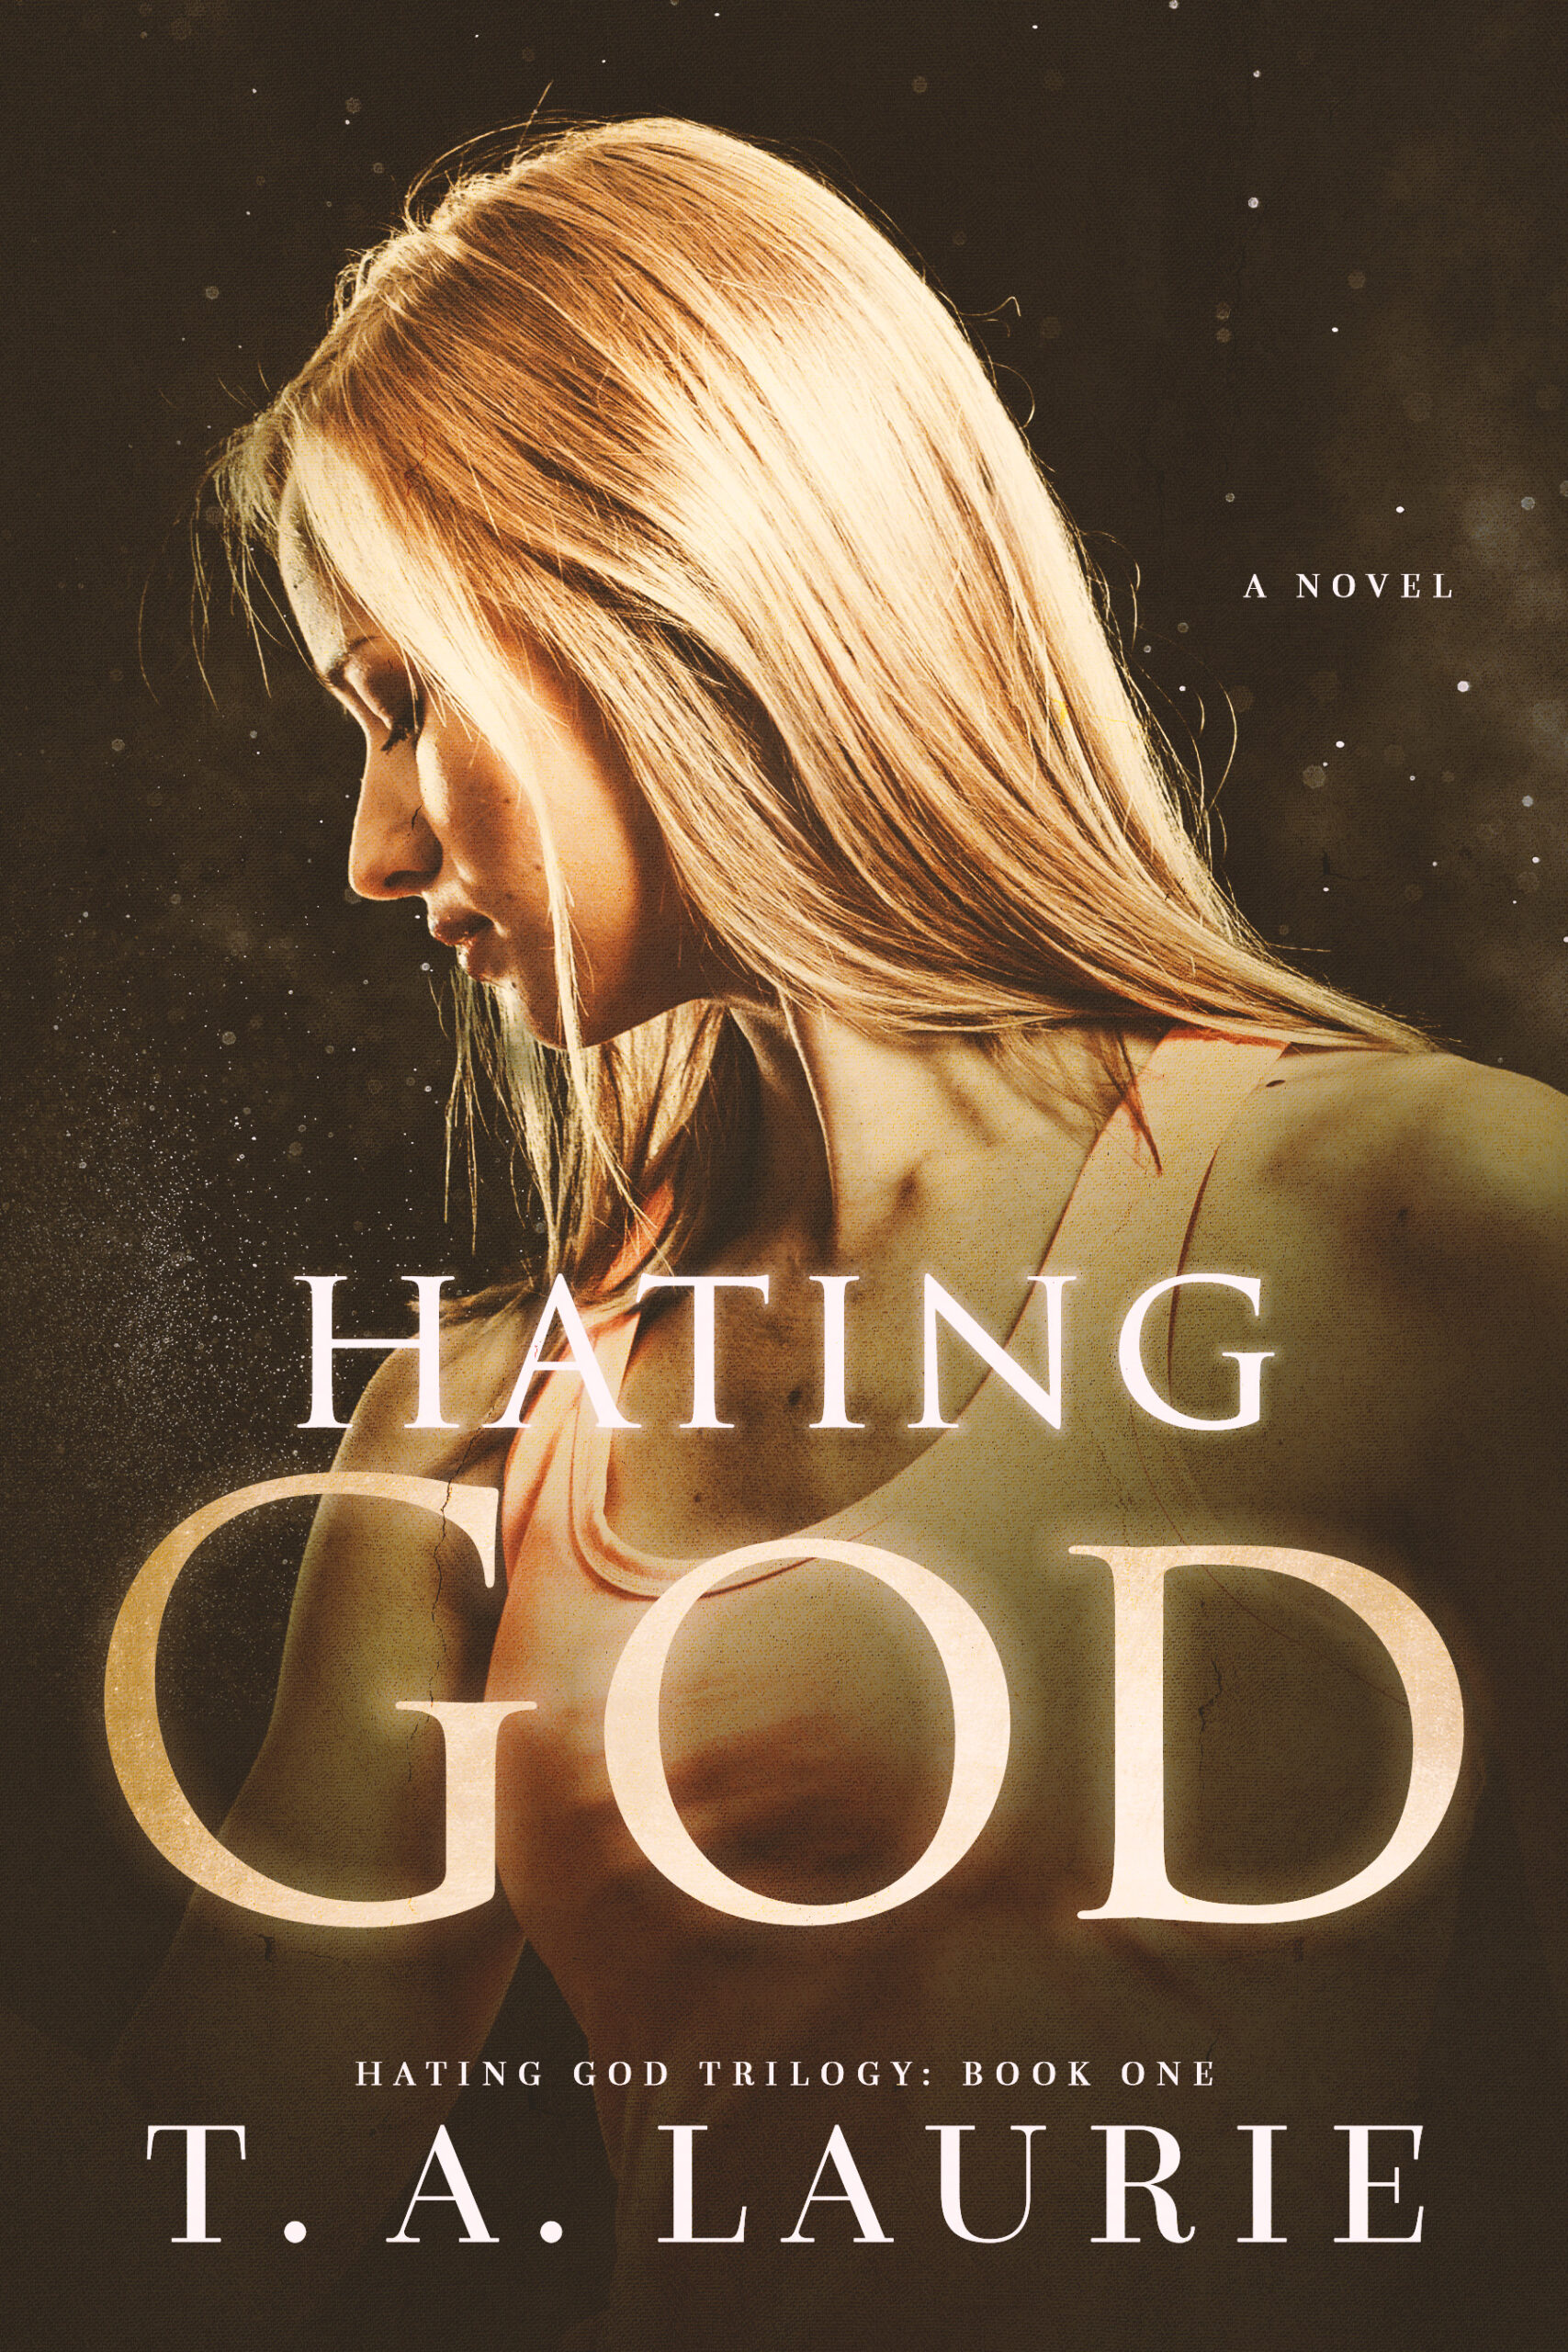 FREE: Hating God by Thomas Arthur Laurie